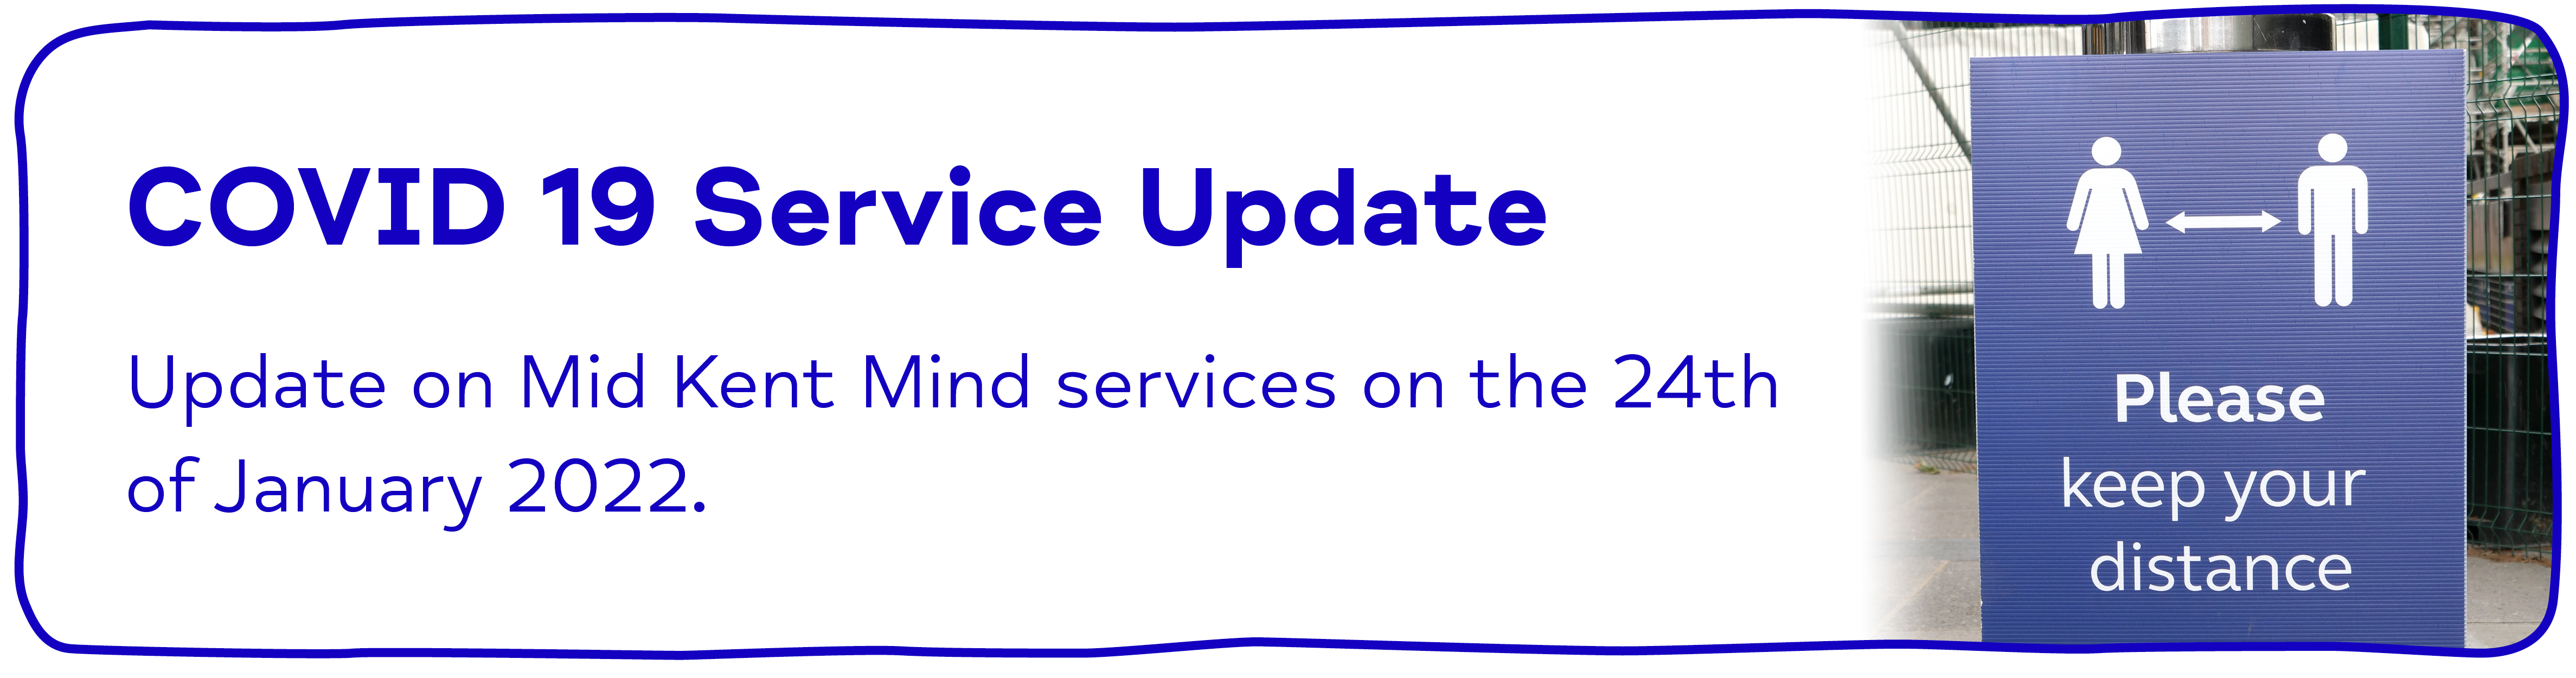 COVID 19 Service Update Update on Mid Kent Mind services on the 24th of January 2022.